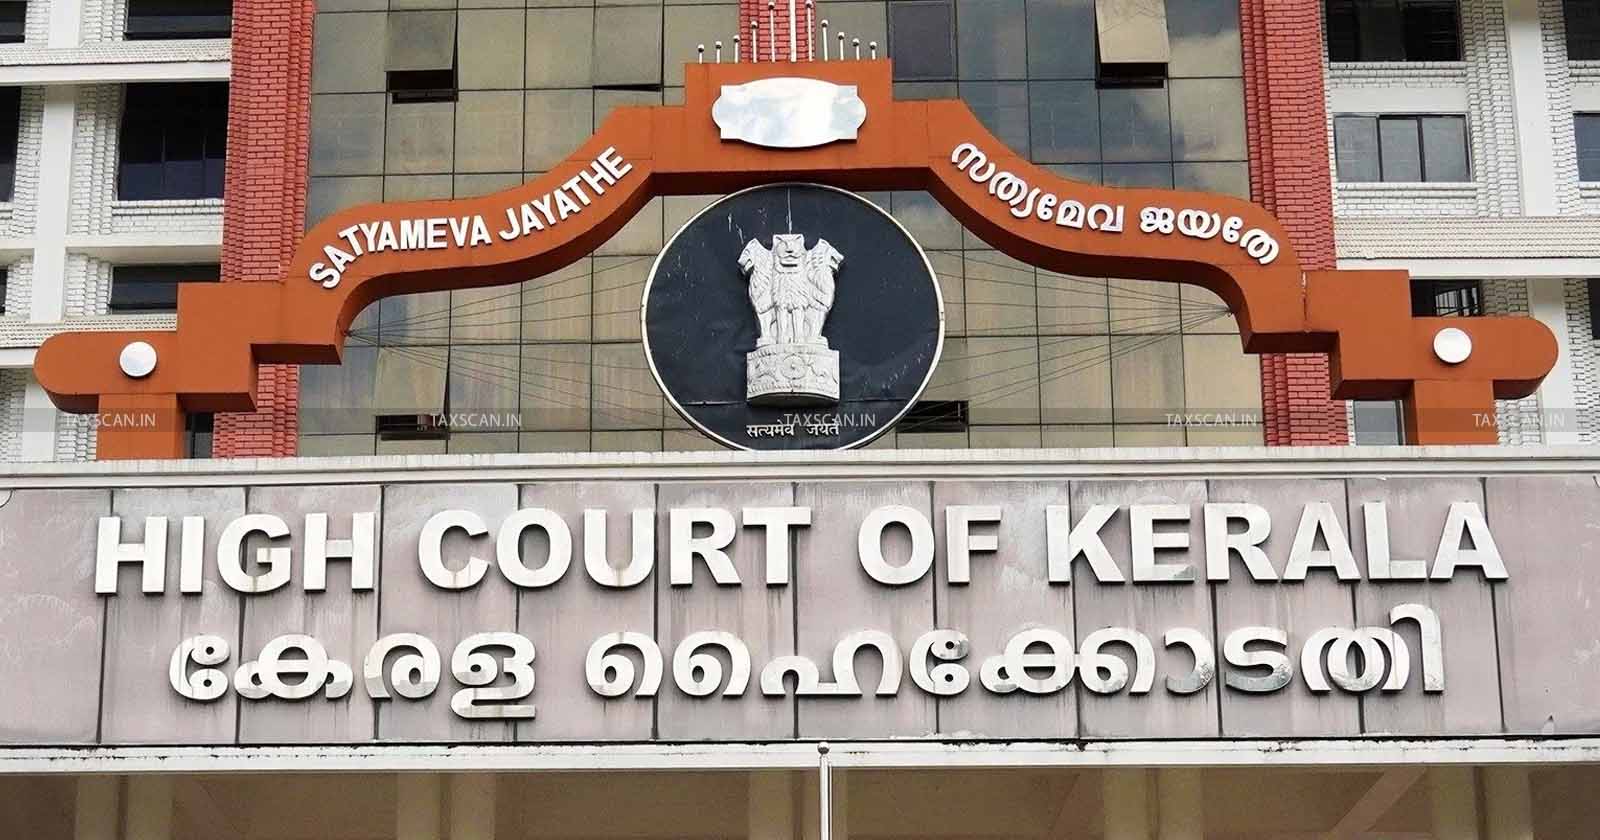 Revival of Toddy Shop Licence - sought only if petitioner - Compound Offences alleged-Kerala HC directs Deputy -Excise Commissioner -TAXSCAN